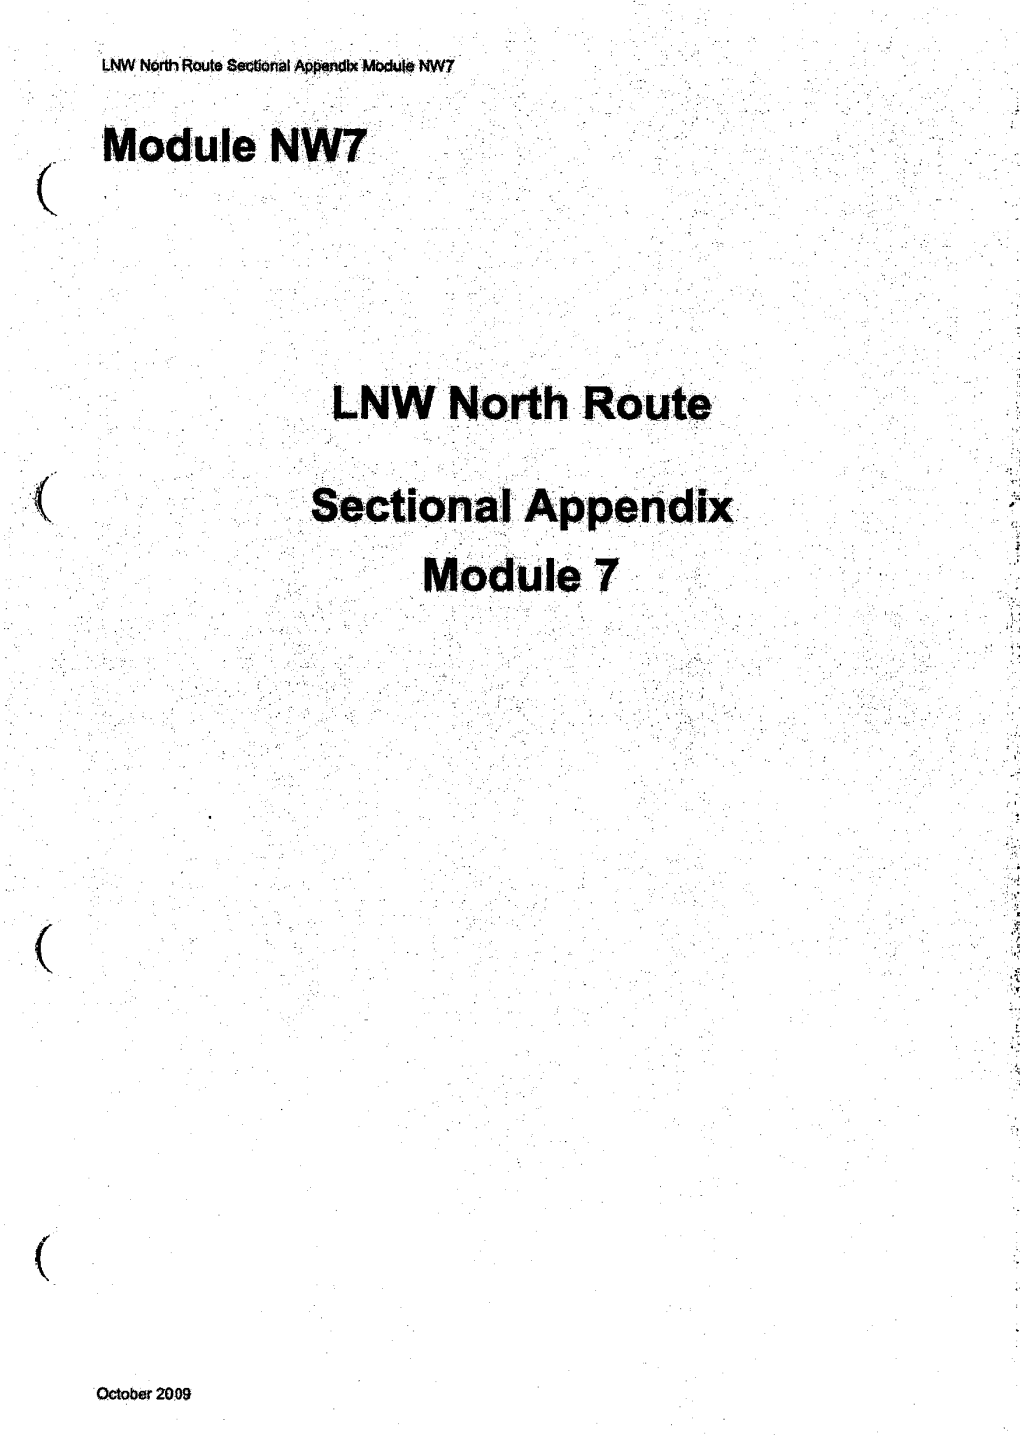 Module NW7 LNW North Route Ectional Appendix Module 7